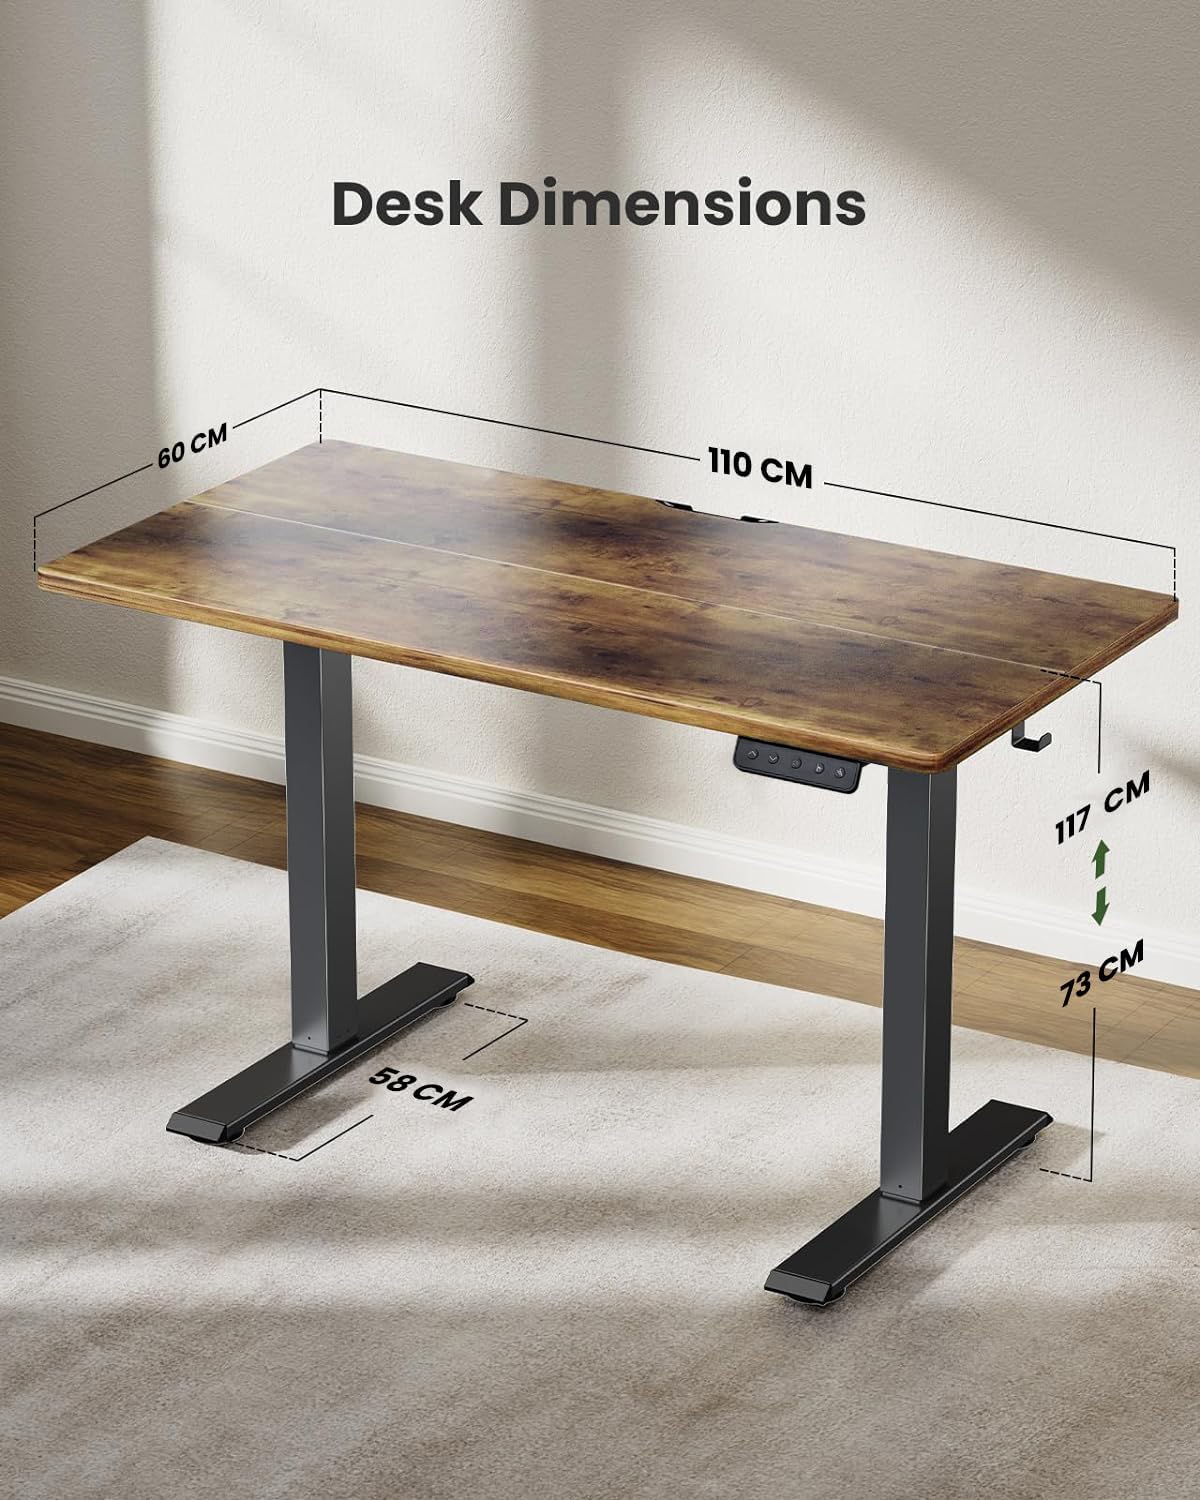 Drogo Artikel Electric Height Adjustable Table Diy, Sit Stand Gaming Desk, with 3 Yr Warranty 110X60Cm - Vintage Brown